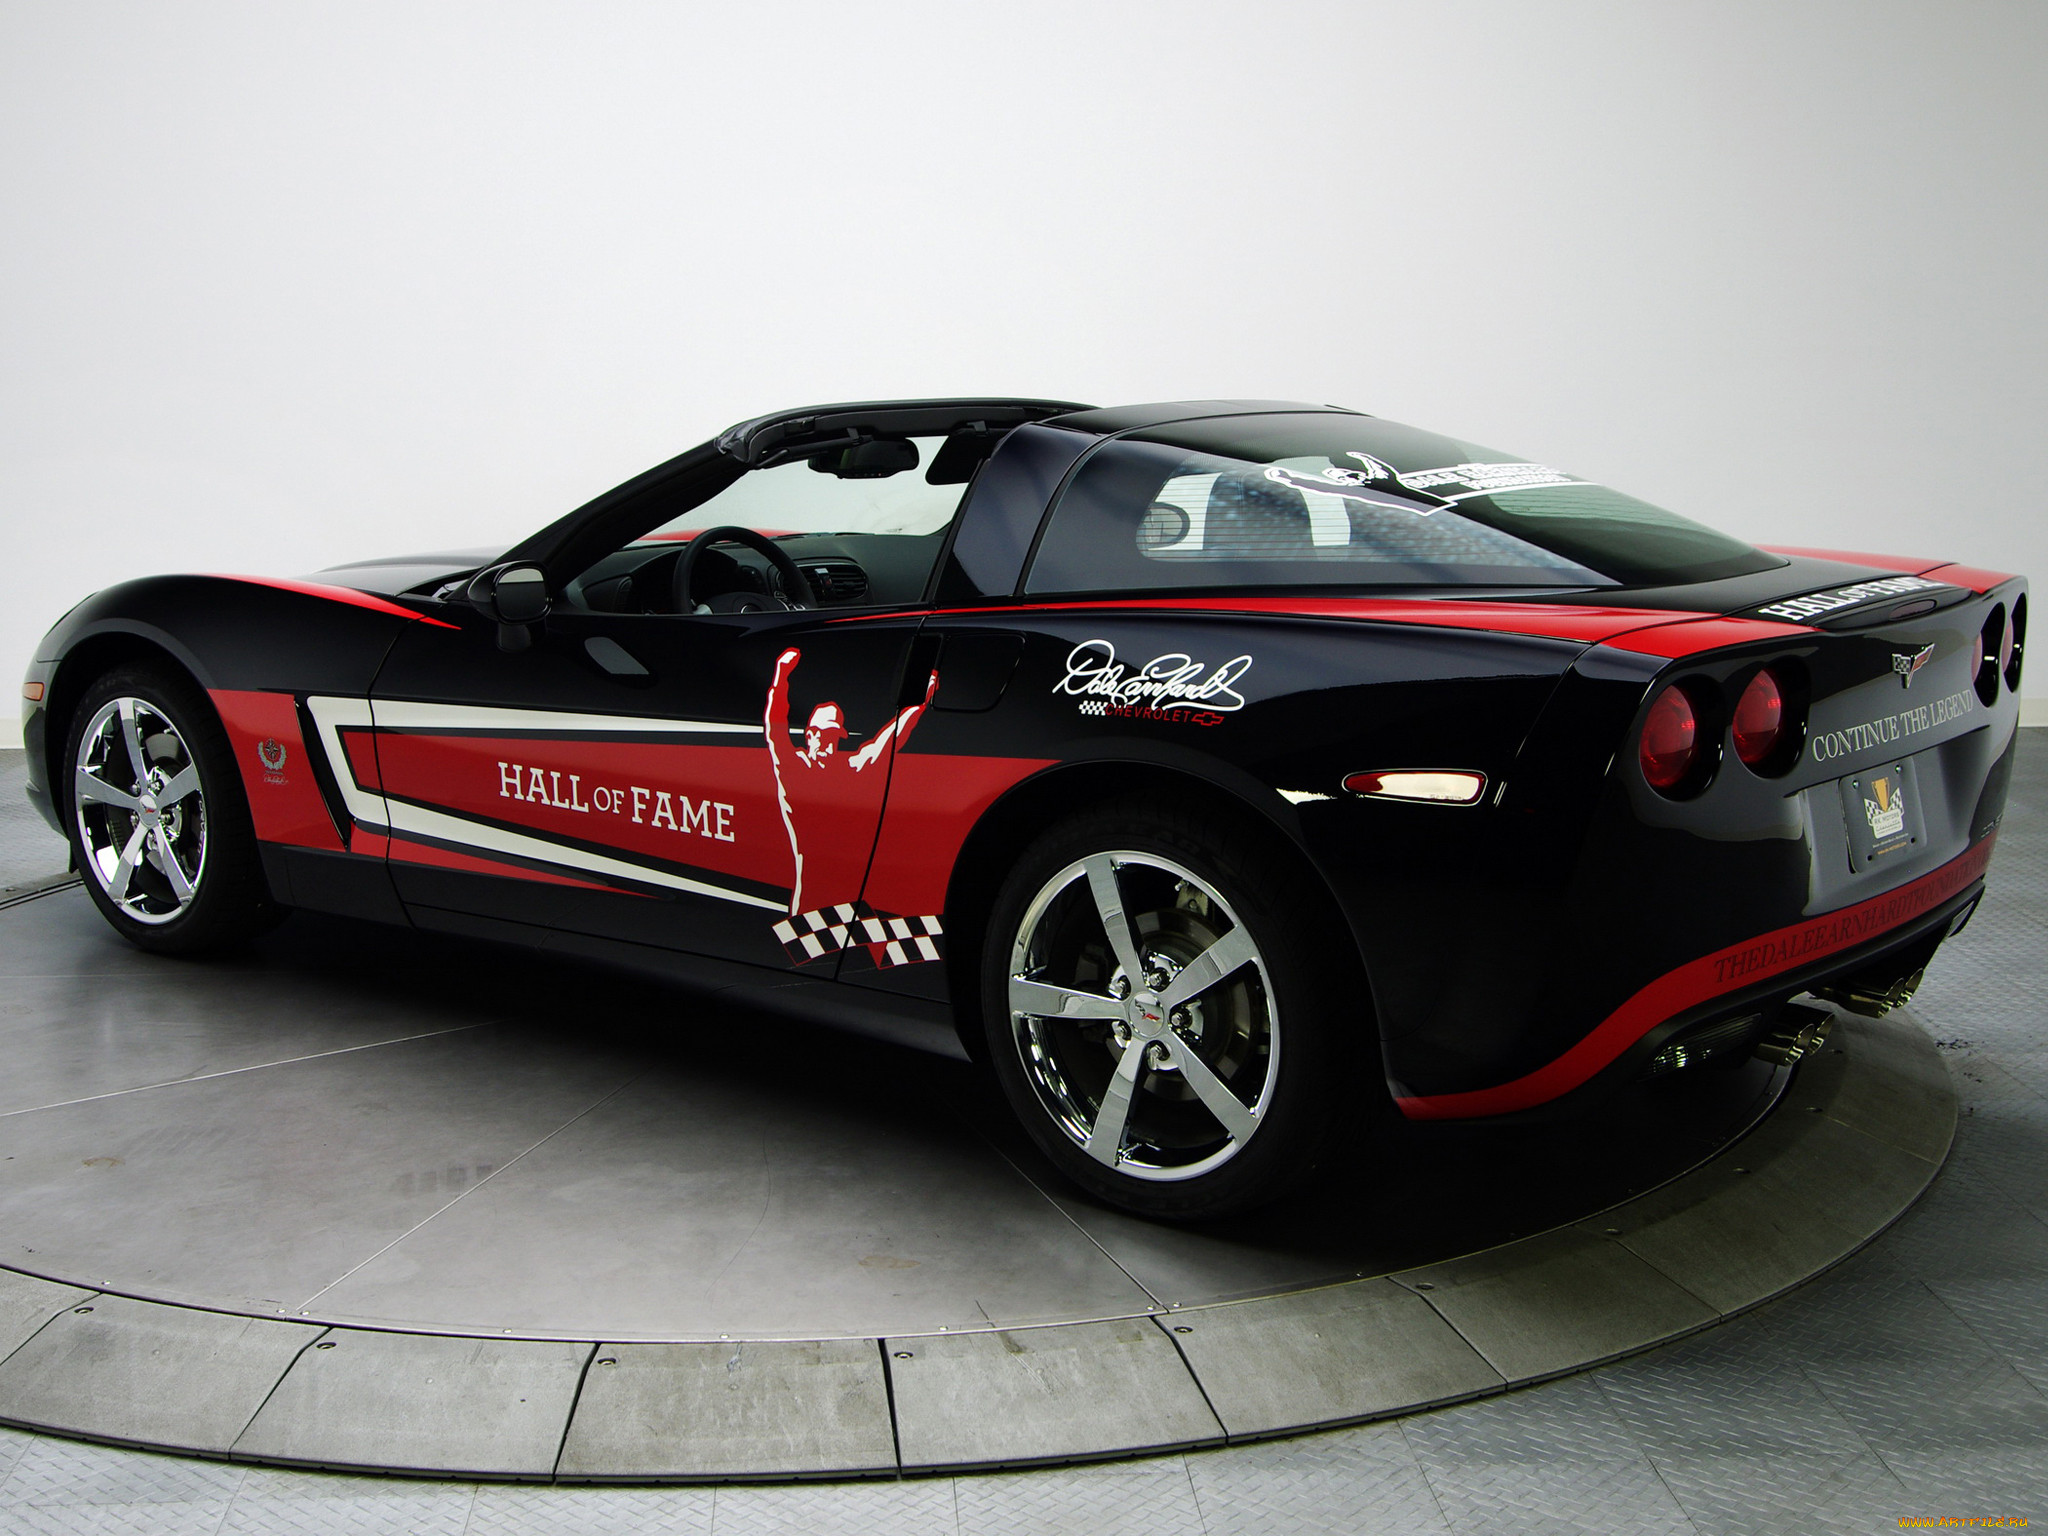 corvette coupe earnhardt hall of fame edition 2010, , corvette, 2010, edition, fame, hall, earnhardt, coupe